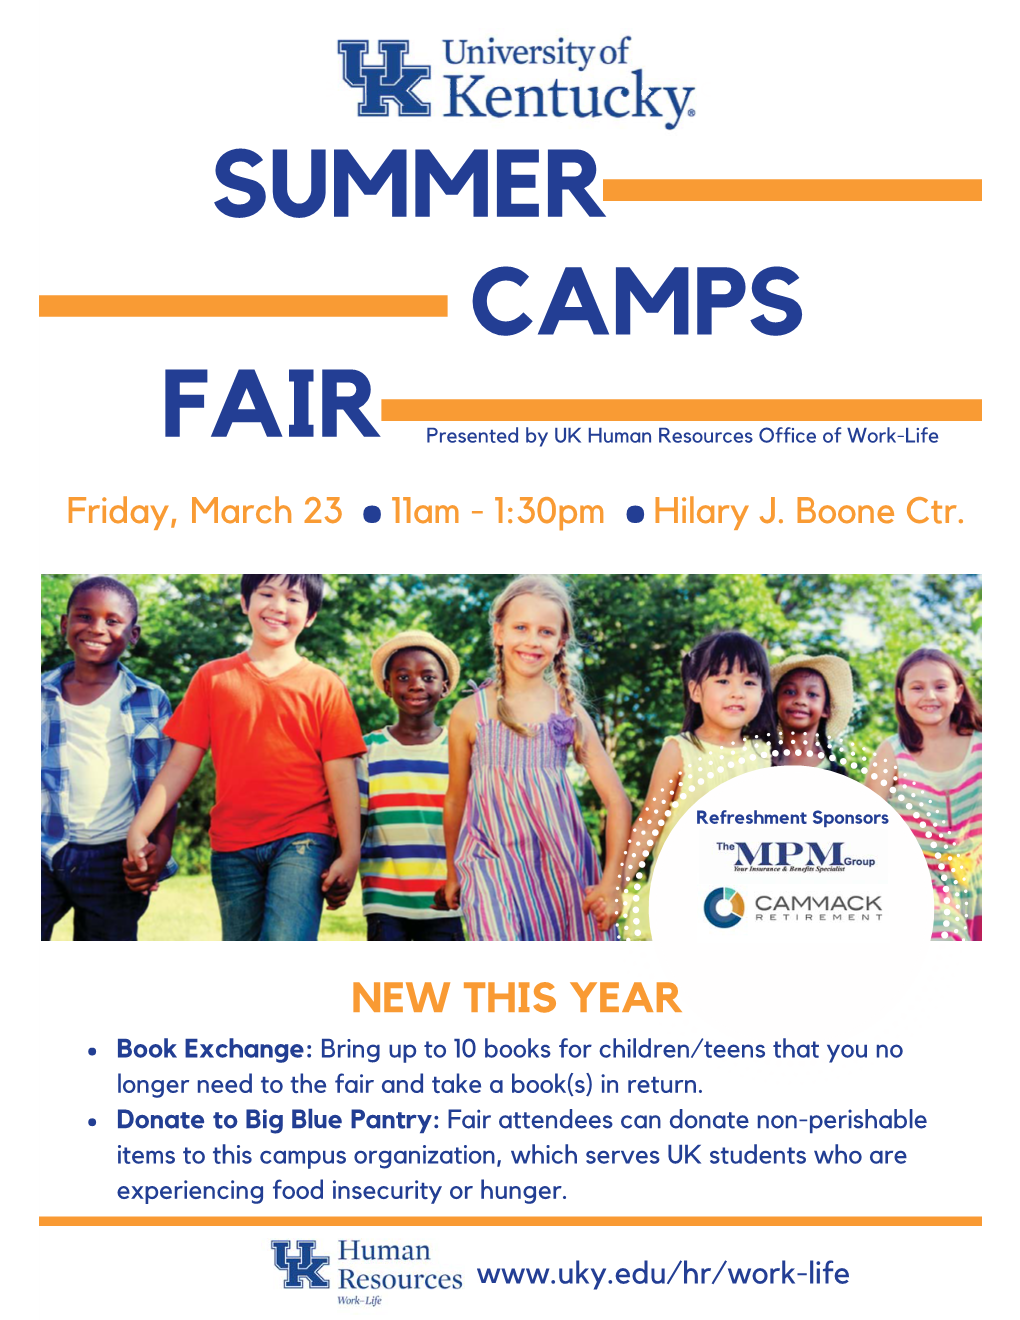 Summer Camps Fair Is Provided for Informational Purposes and Does Not Constitute a Recommendation Or Endorsement by UK Work-Life Or the University of Kentucky